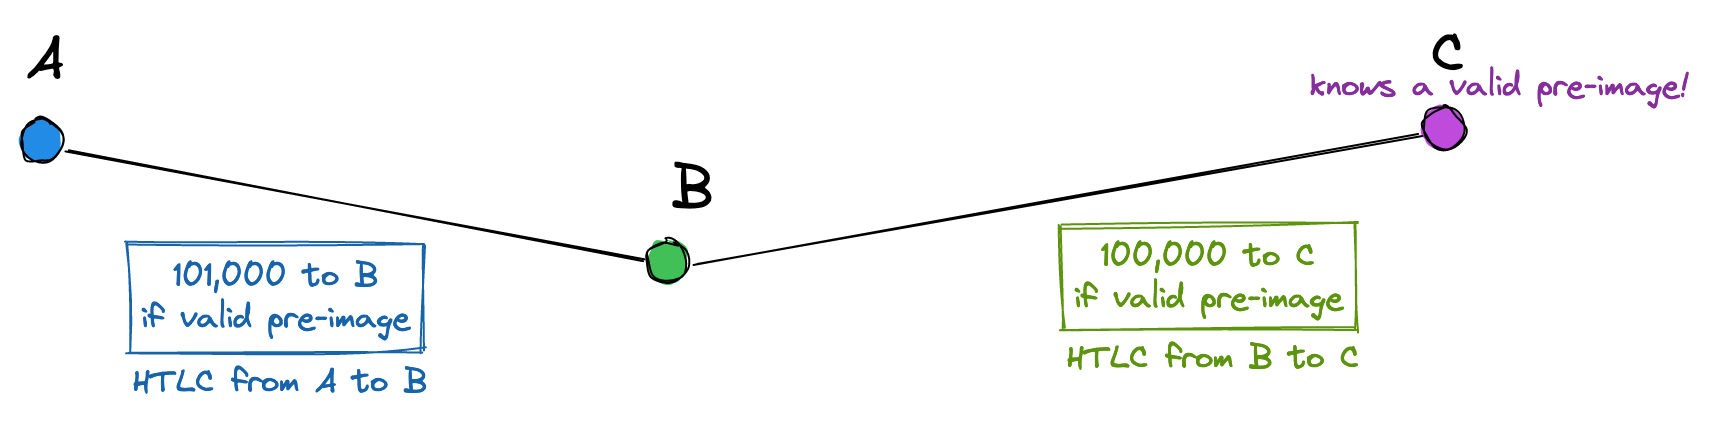 HTLC diagram: A-to-B-to-C